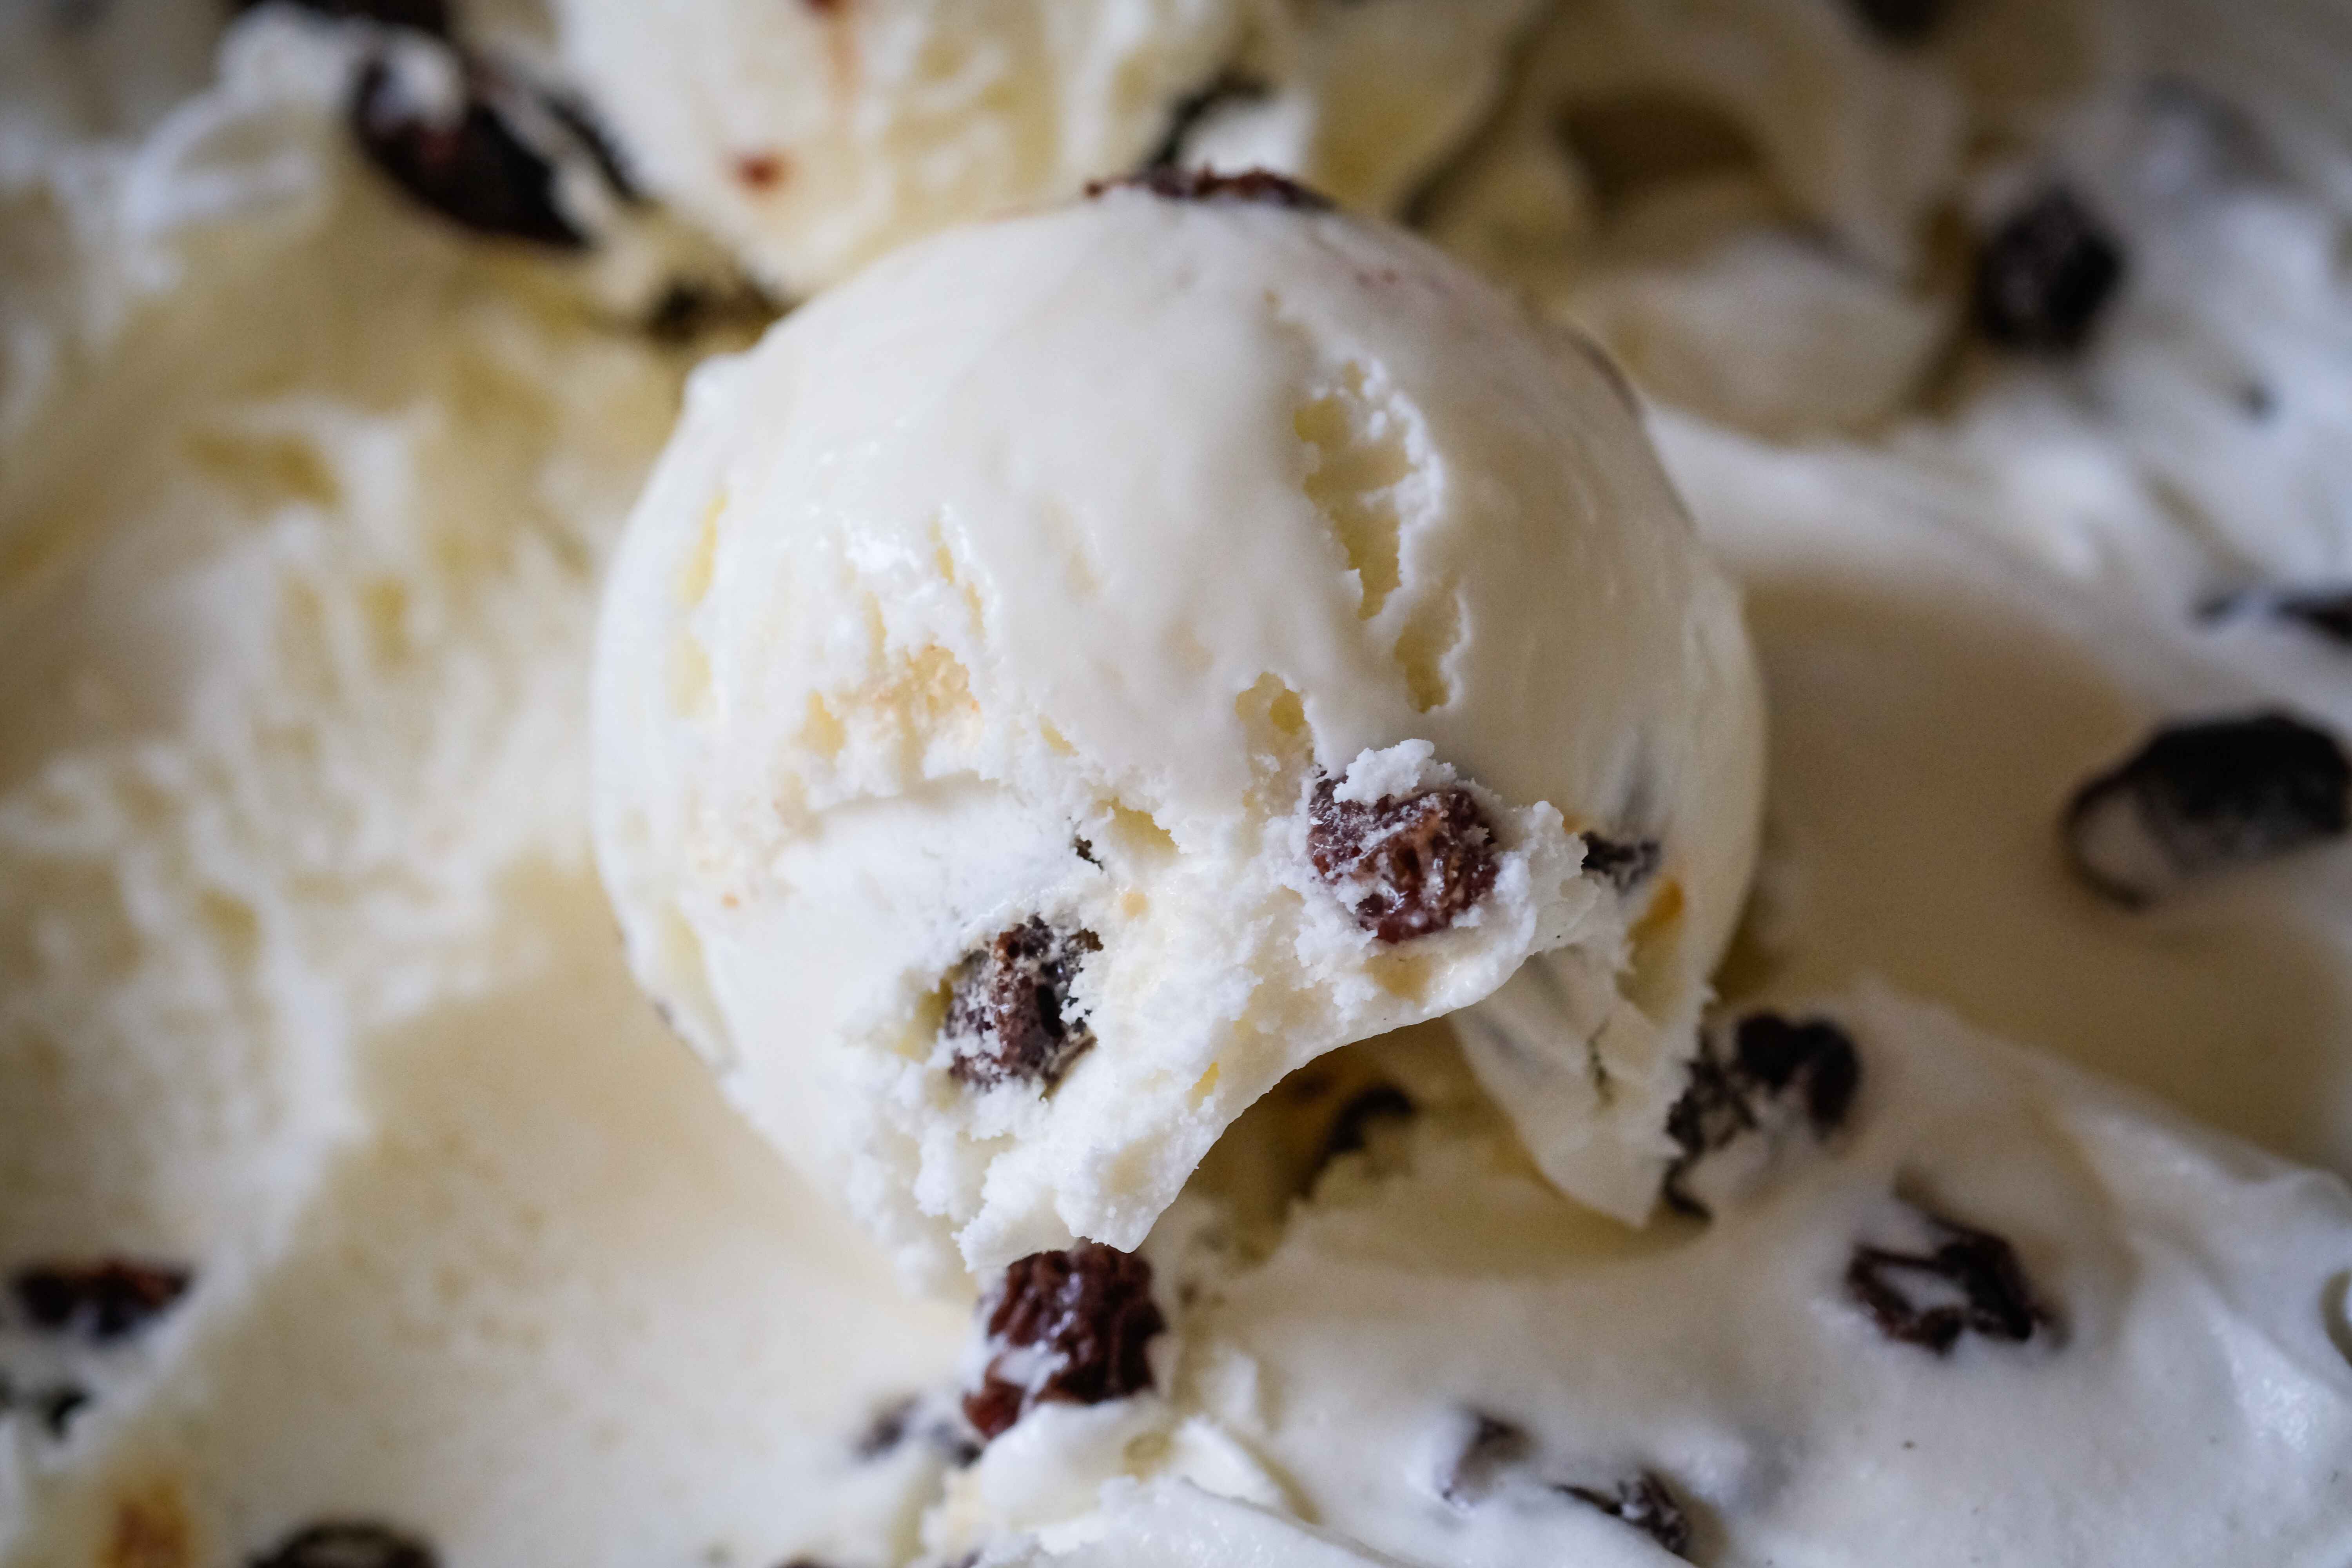 Yorvale's rum and raisin ice cream to show how you can master ice cream scooping with a well organized freezer 